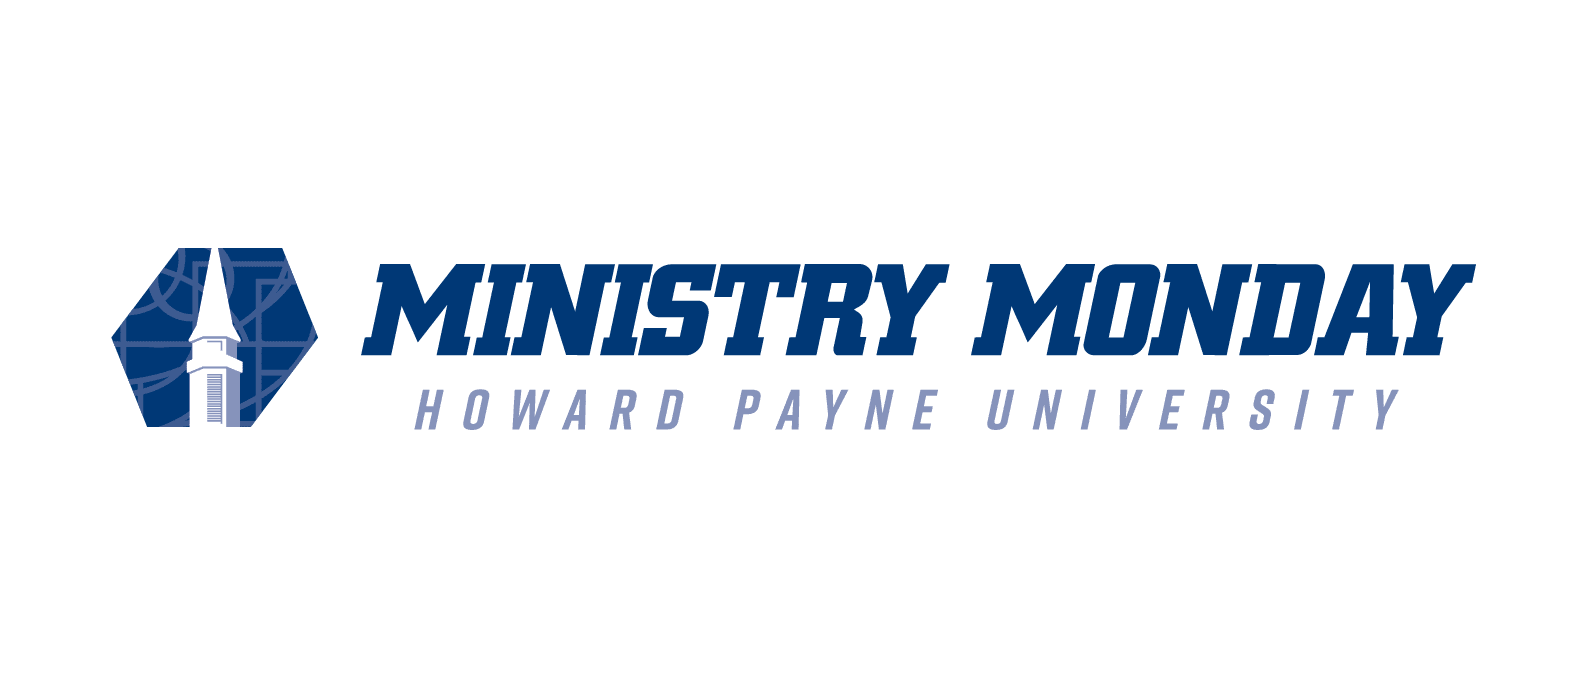 Logo of "ministry monday" at Howard Payne University featuring an illustration of a building. | HPU